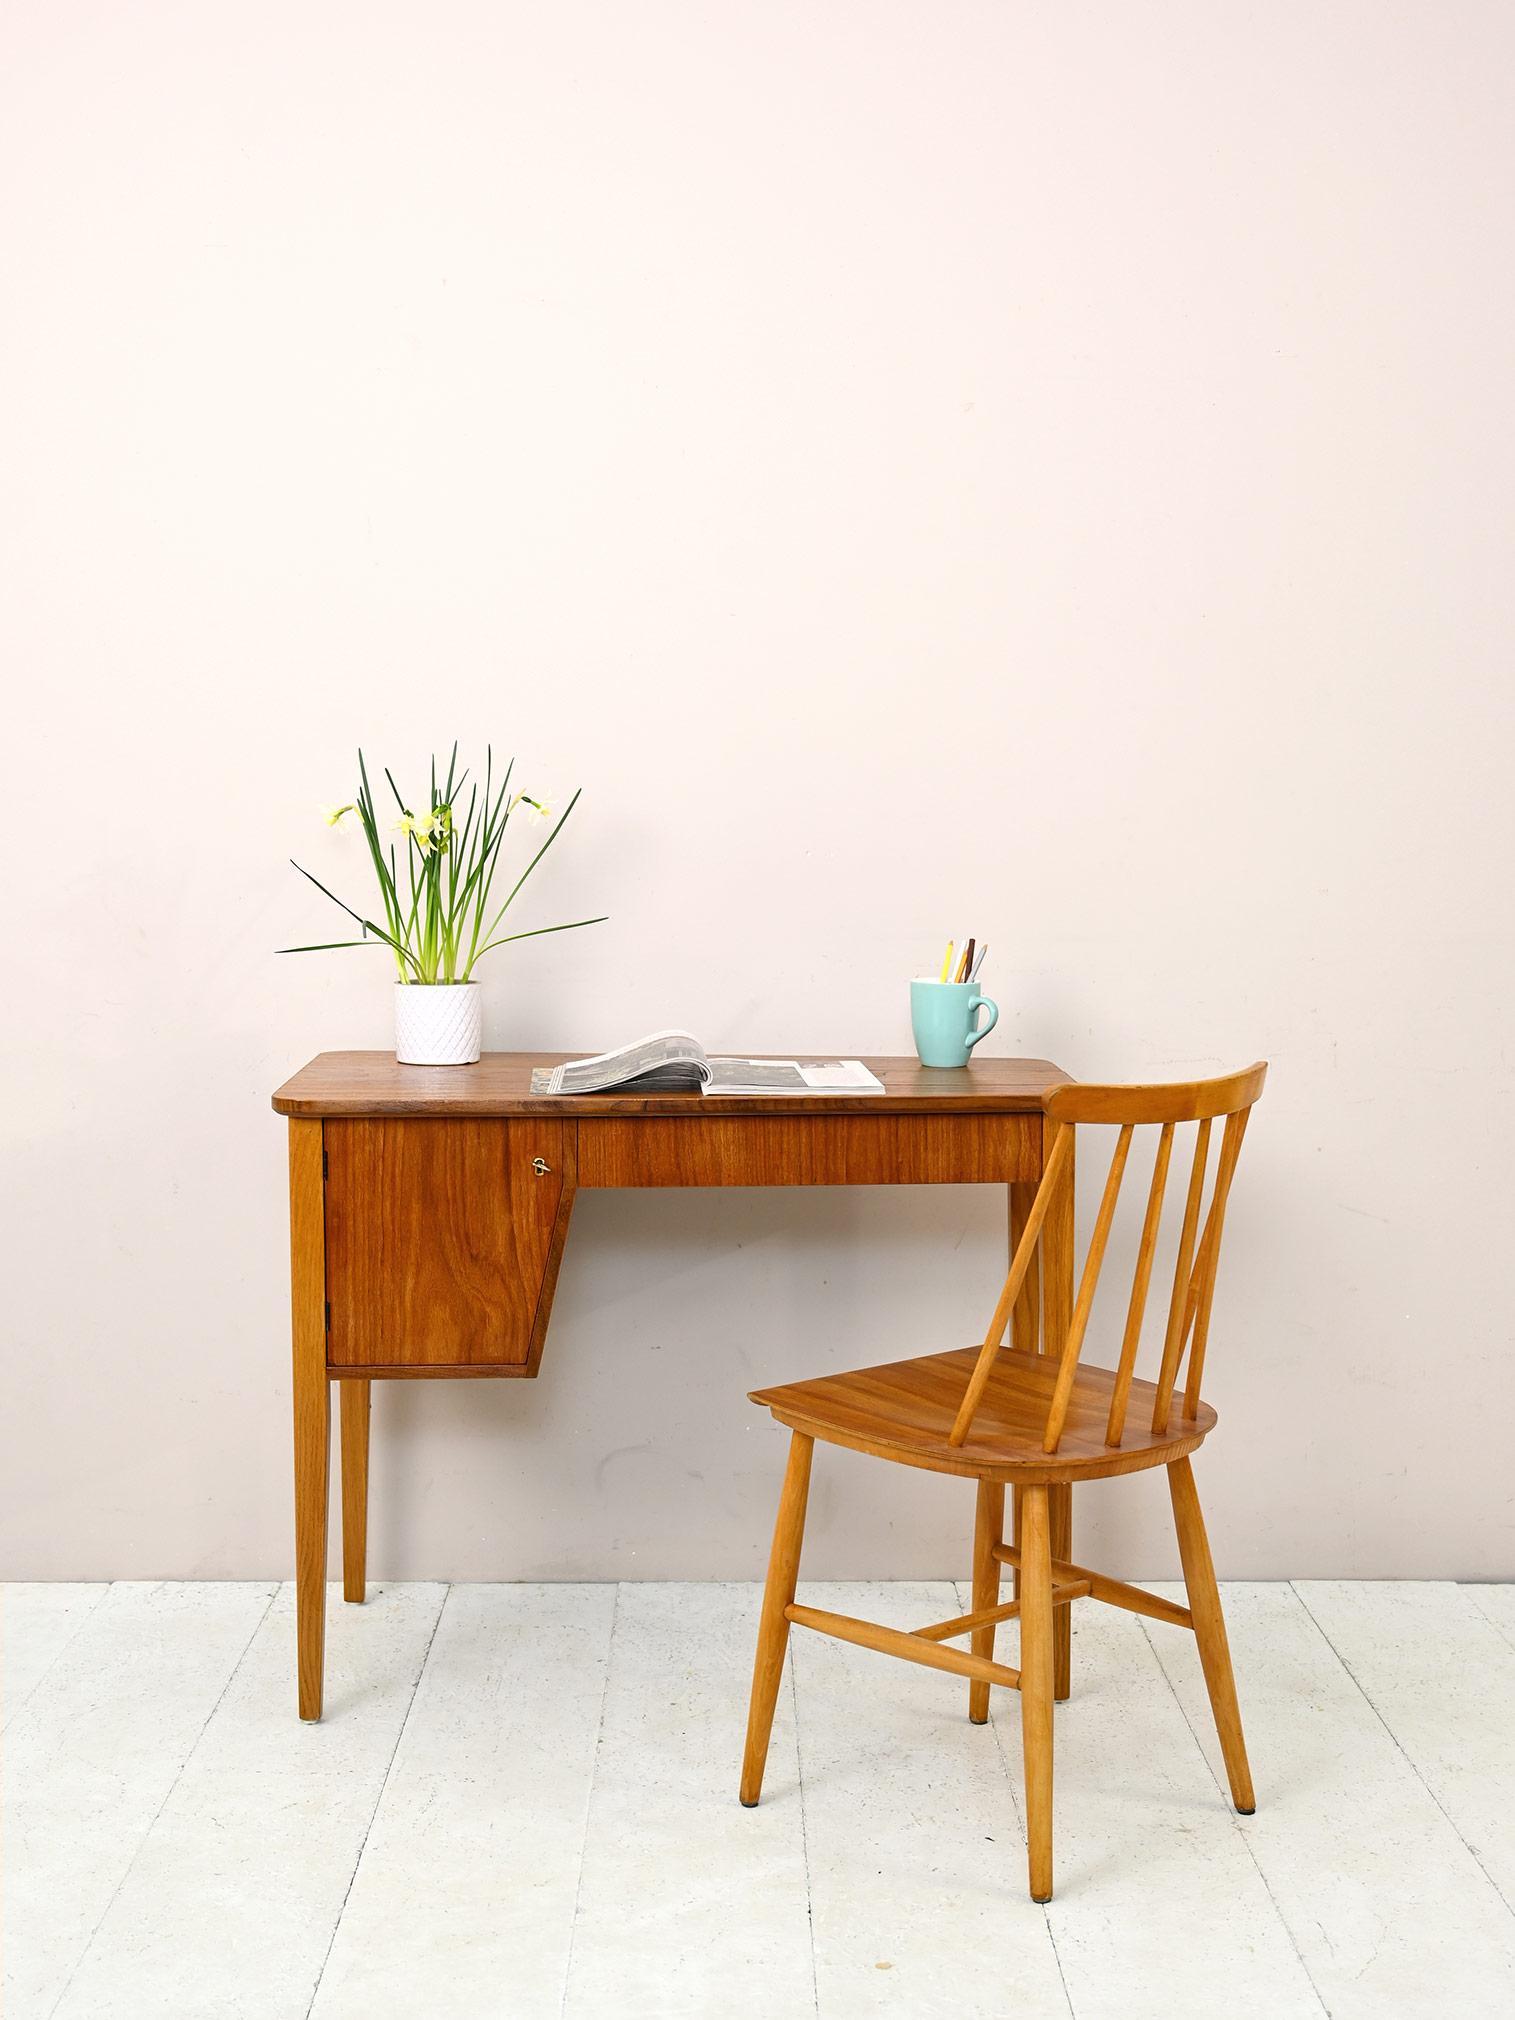 Small 1960s teak desk.

This small desk is perfect for recreating a work corner in the bedroom as well. 
It features long tapered legs in light oak wood and a teak frame that includes a drawer and a lockable storage compartment.
A retro-flavored